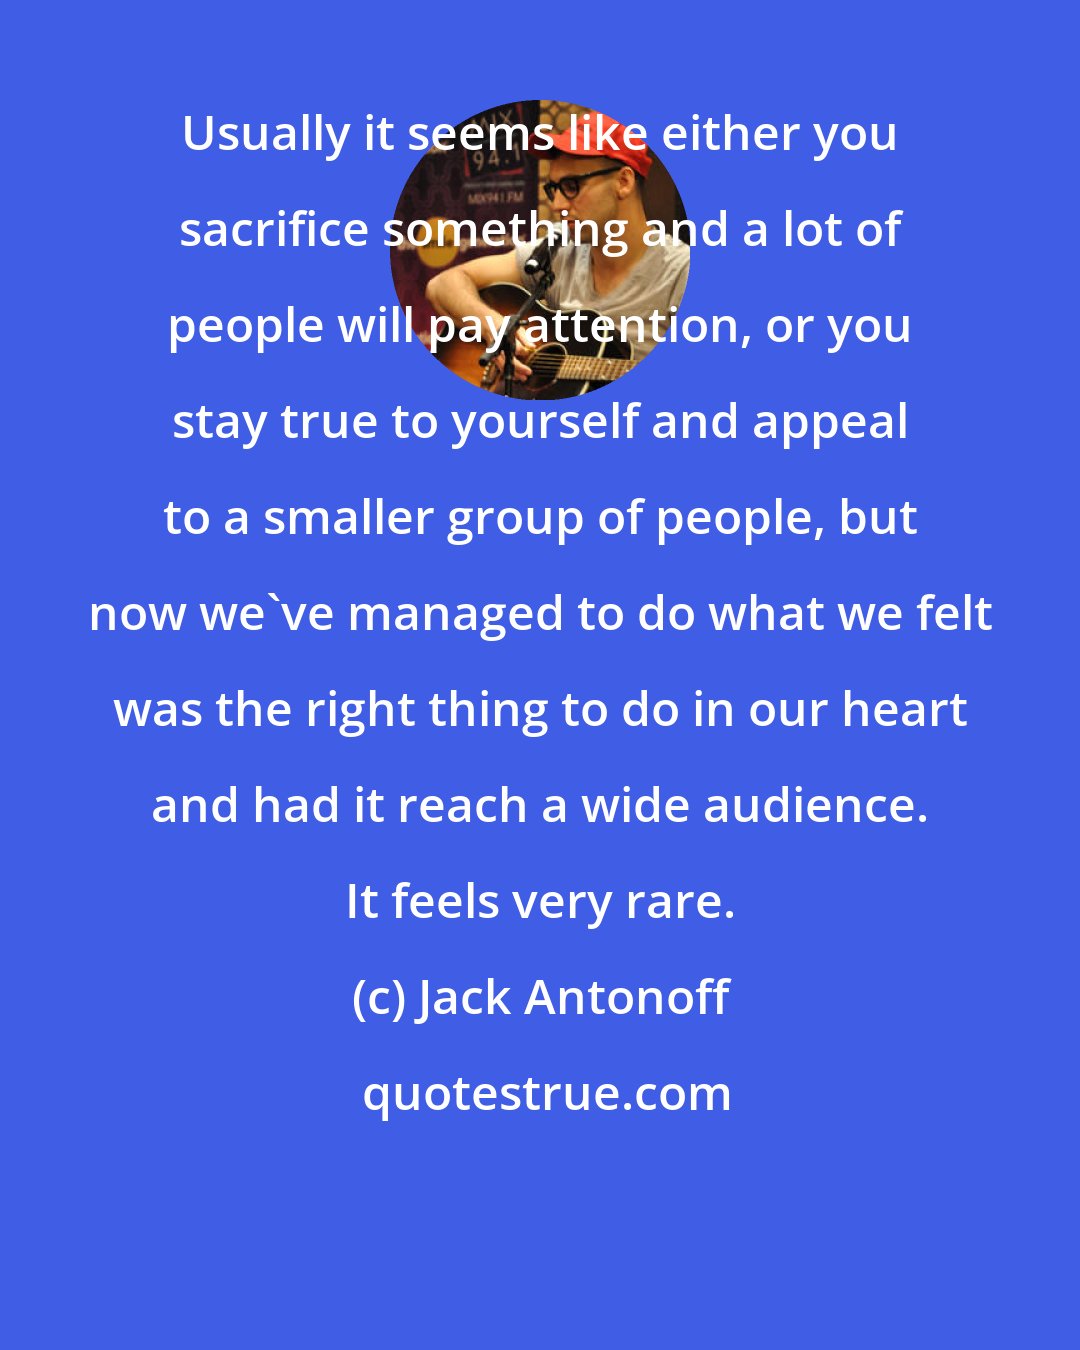 Jack Antonoff: Usually it seems like either you sacrifice something and a lot of people will pay attention, or you stay true to yourself and appeal to a smaller group of people, but now we've managed to do what we felt was the right thing to do in our heart and had it reach a wide audience. It feels very rare.